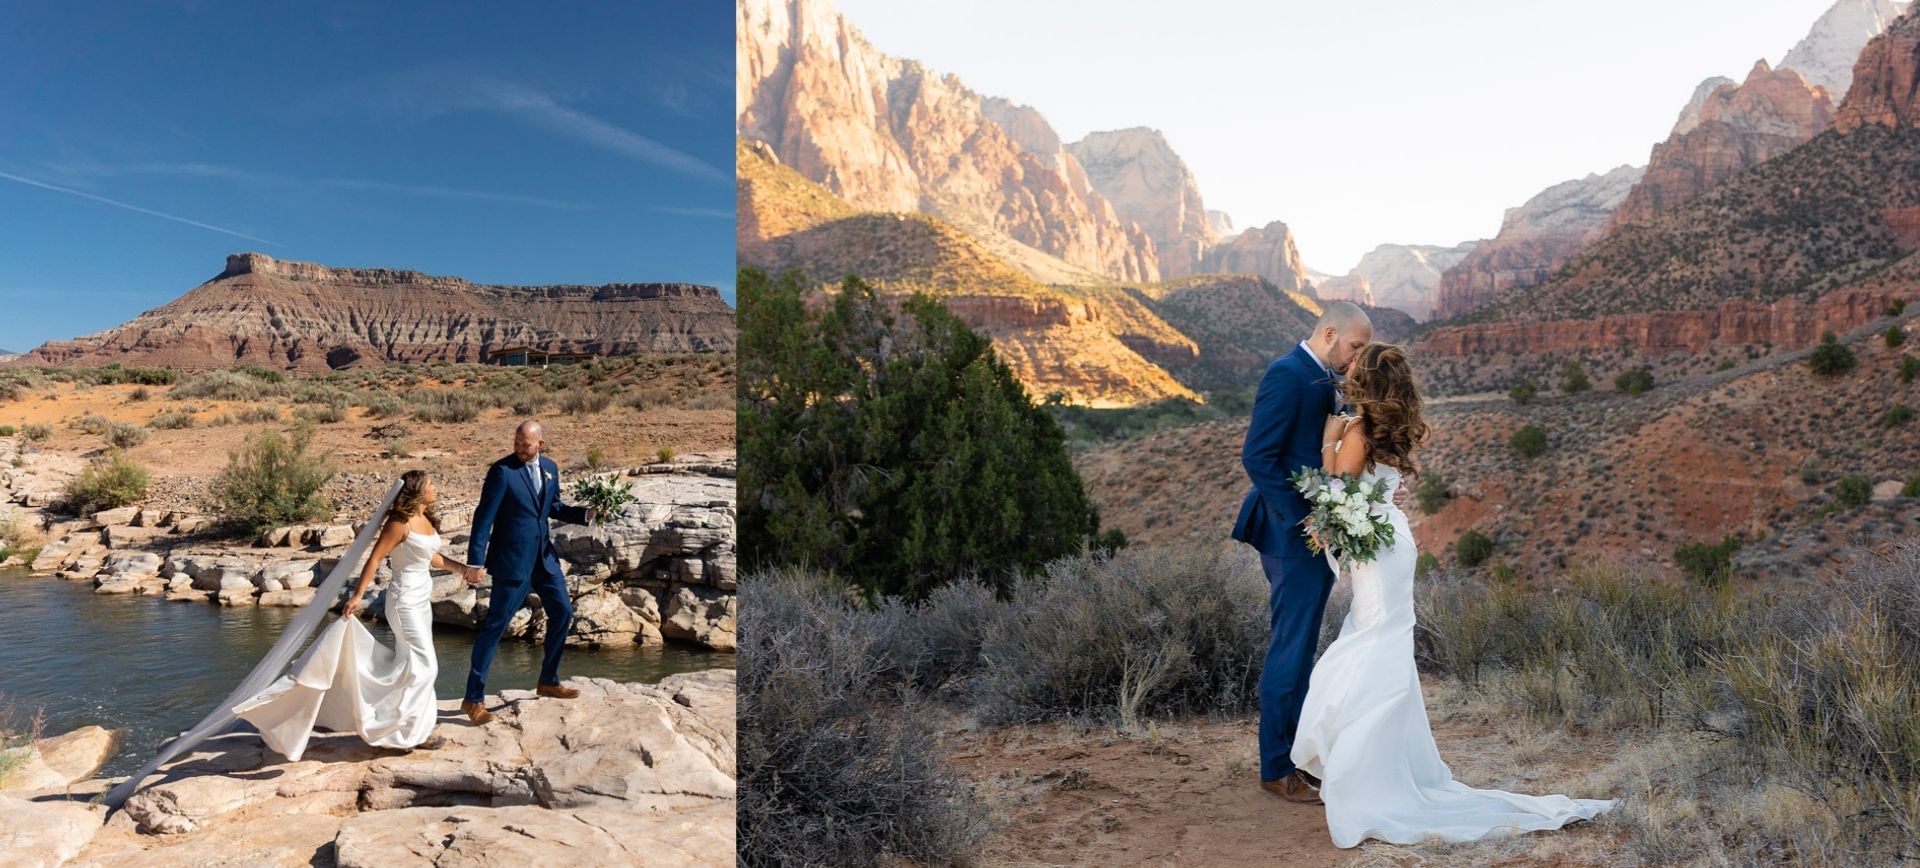 zion national park wedding - bride and groom booked a utah elopement package - wedding picture during wedding ceremony